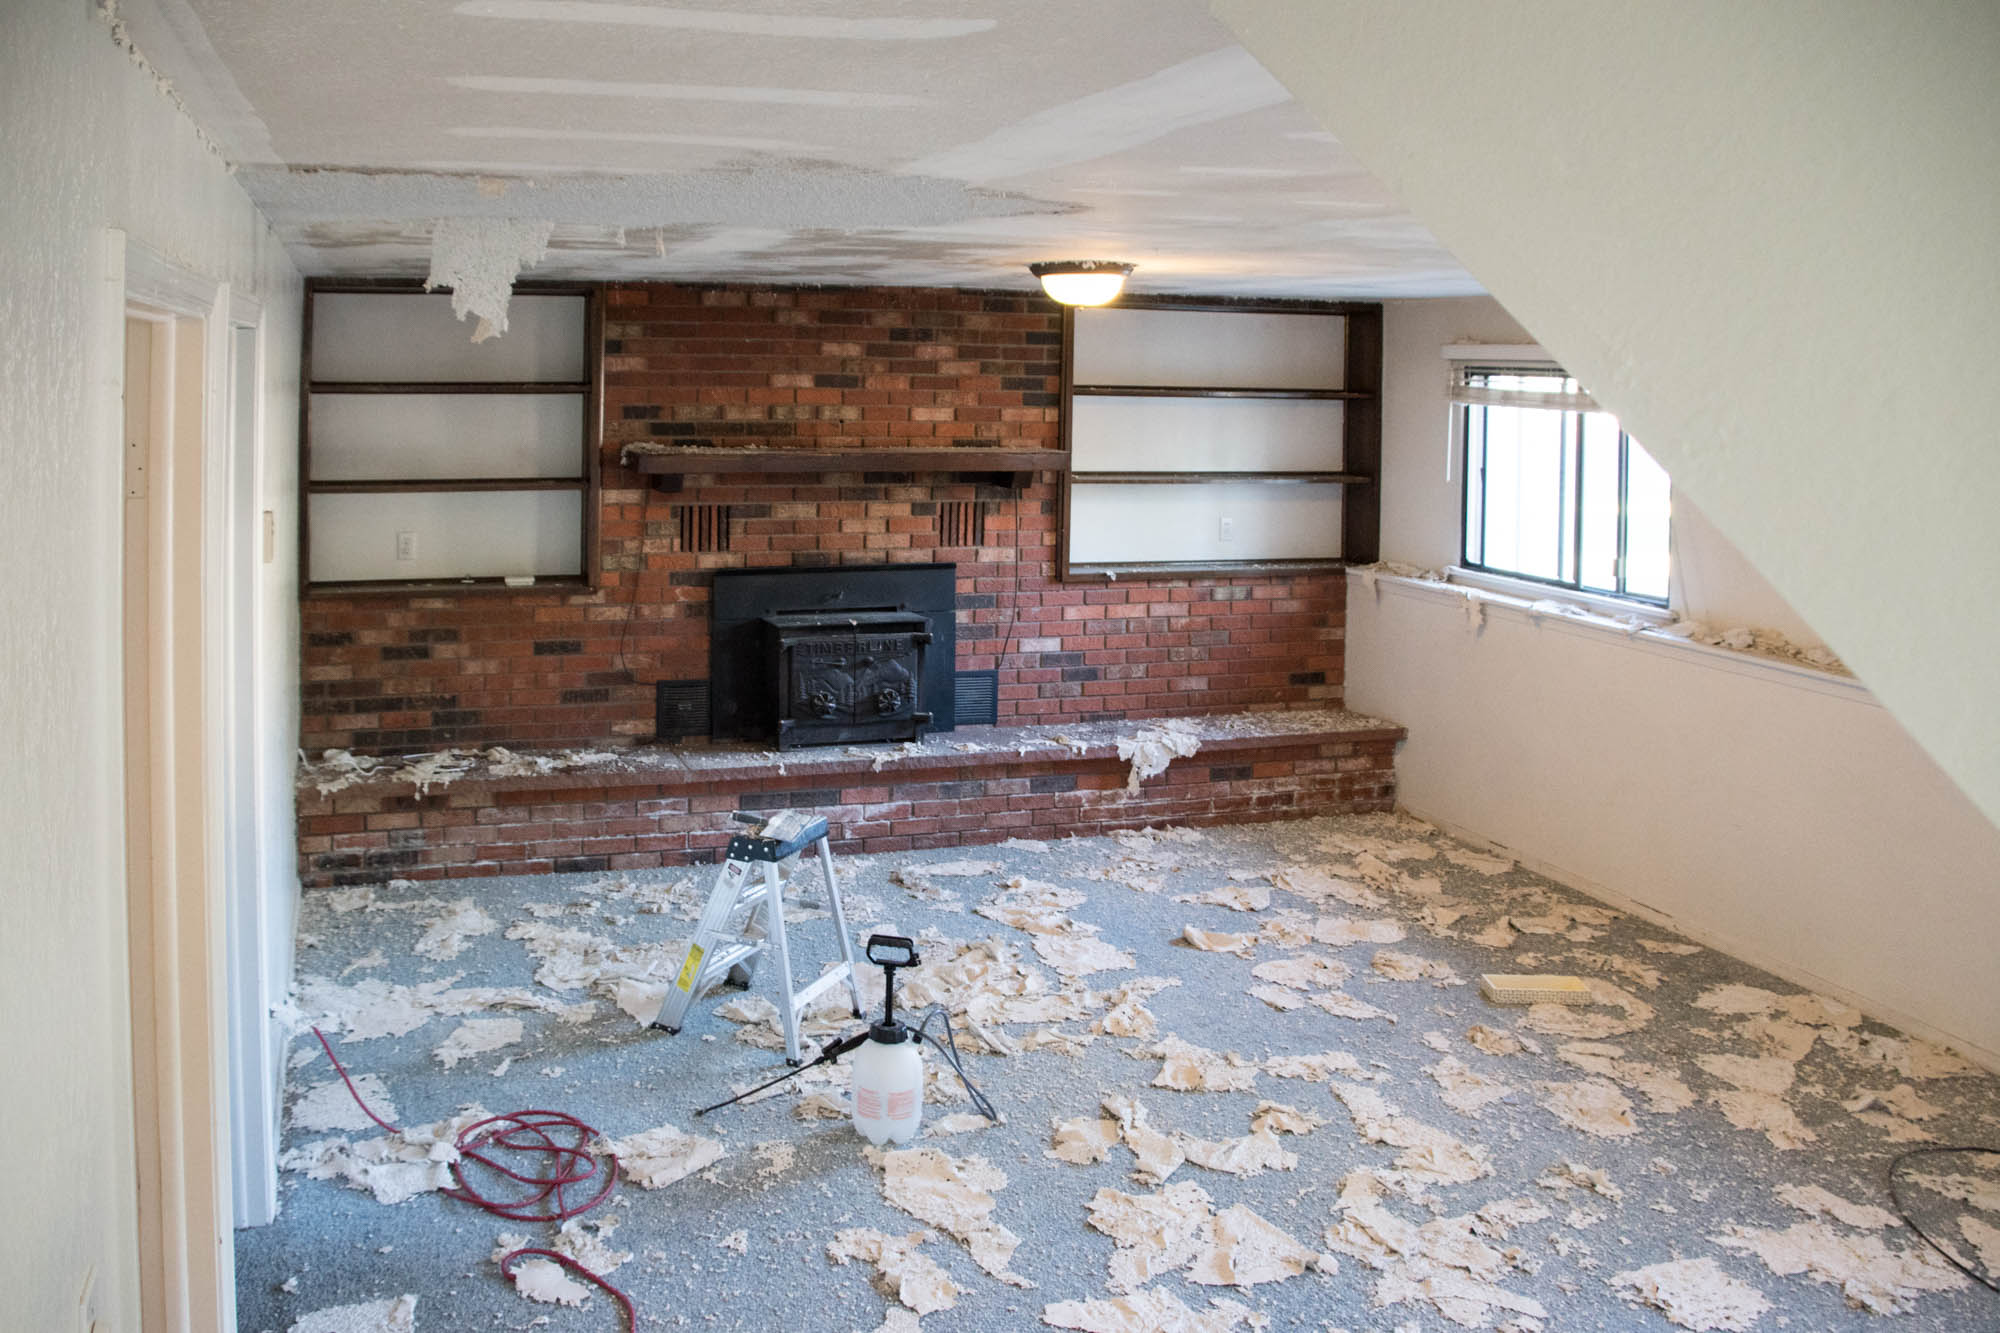 Scraping Popcorn Ceilings & Removing The Carpet